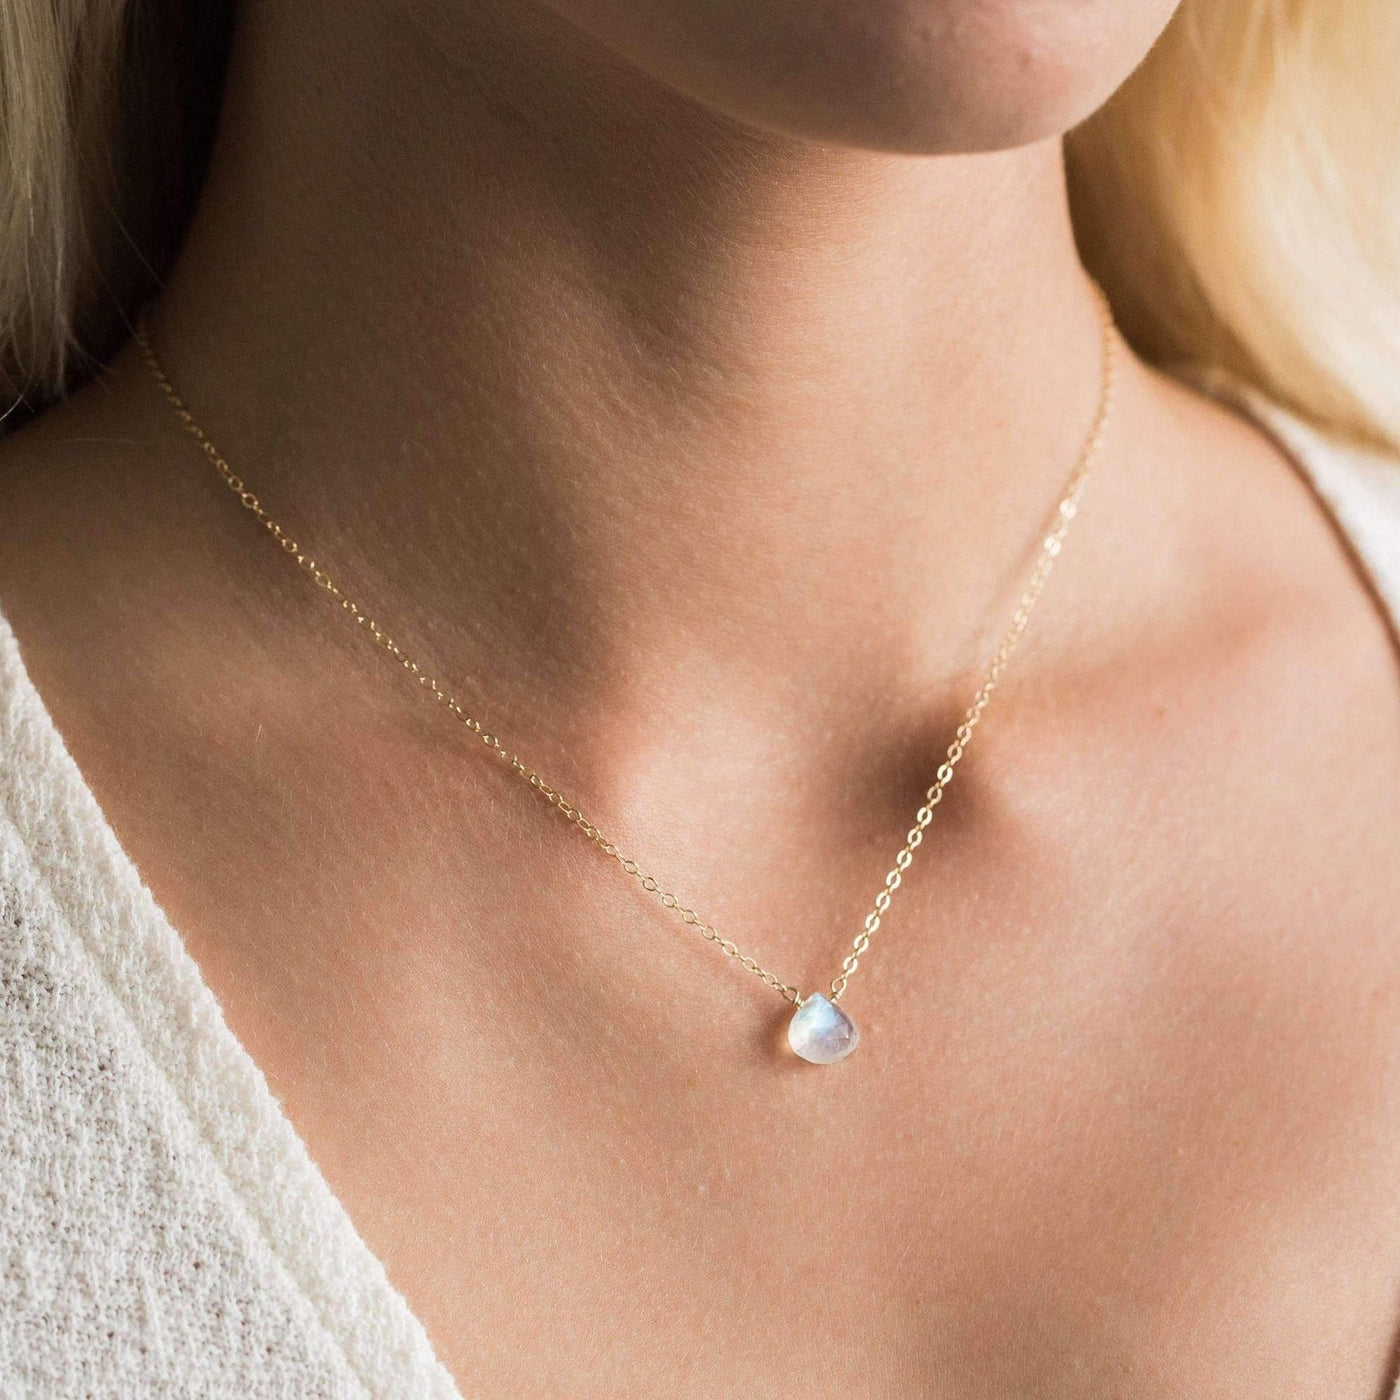 Dainty Moonstone Necklace 2 02d7c199 d751 4a74 ae57